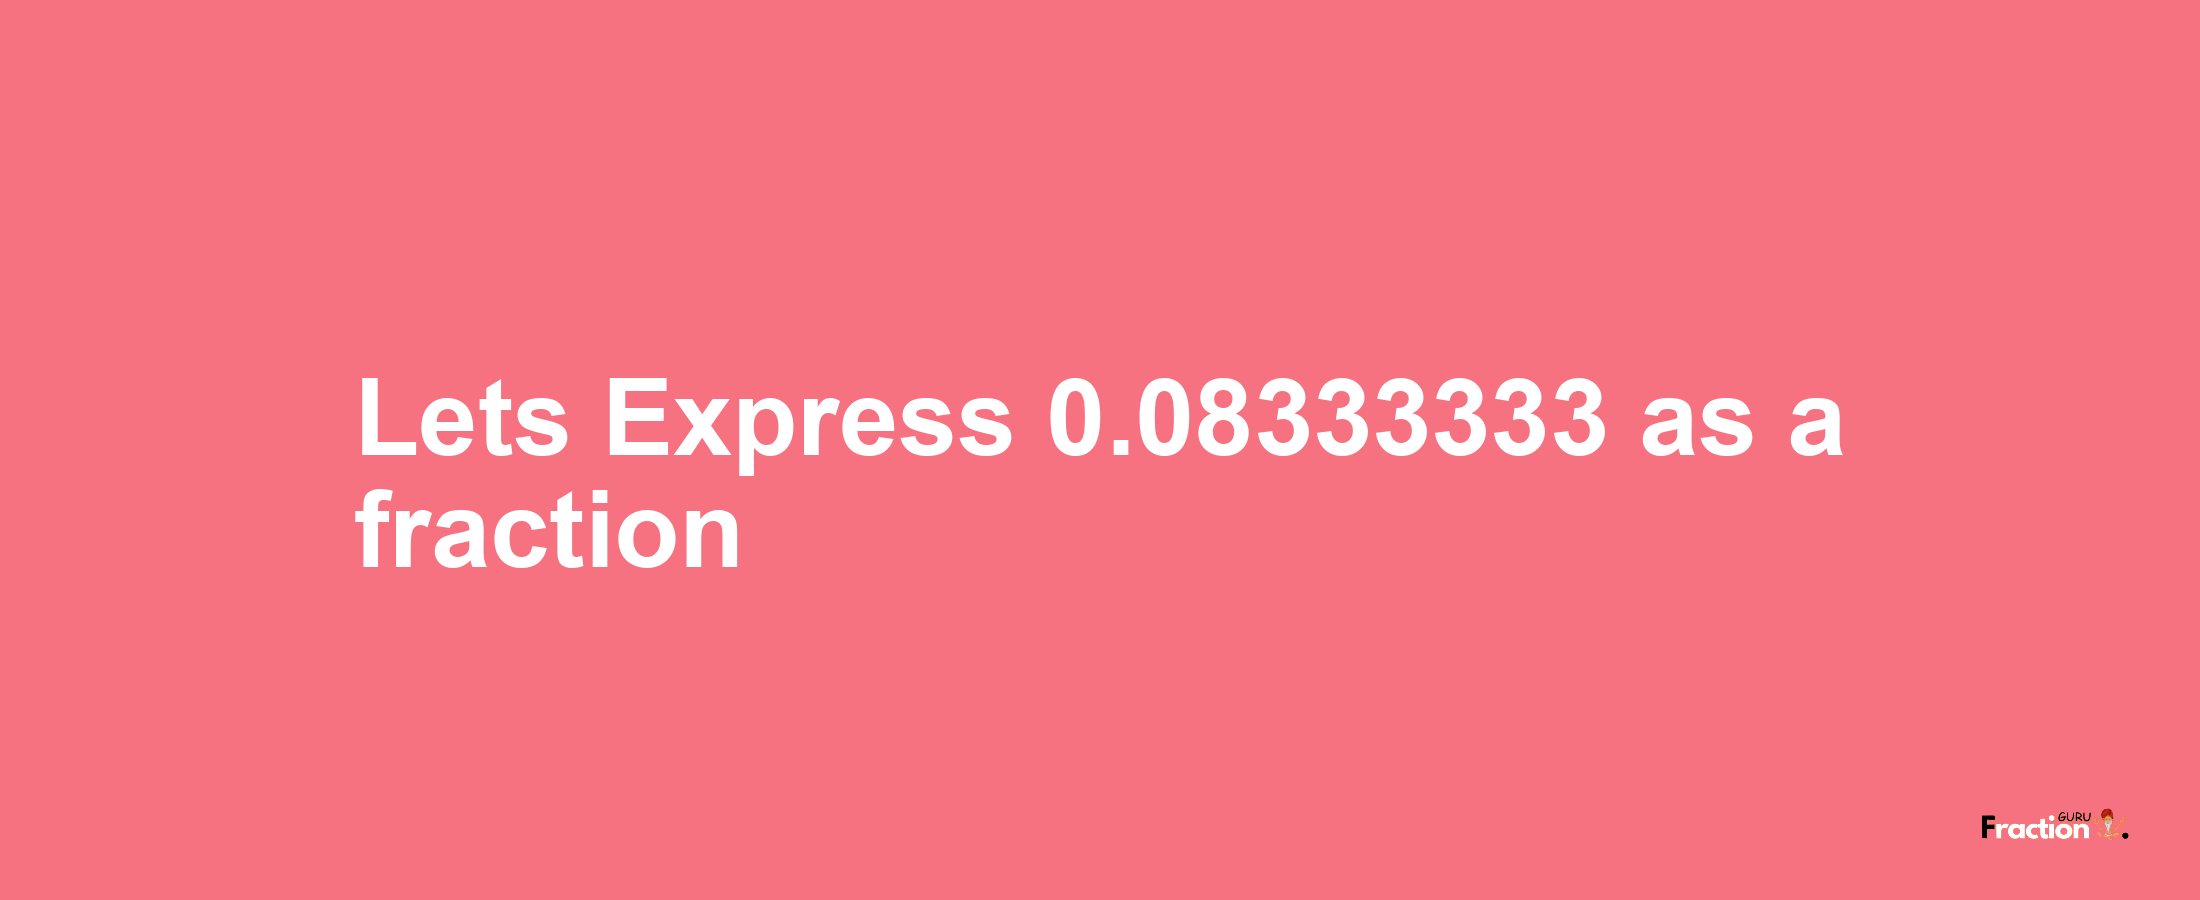 Lets Express 0.08333333 as afraction